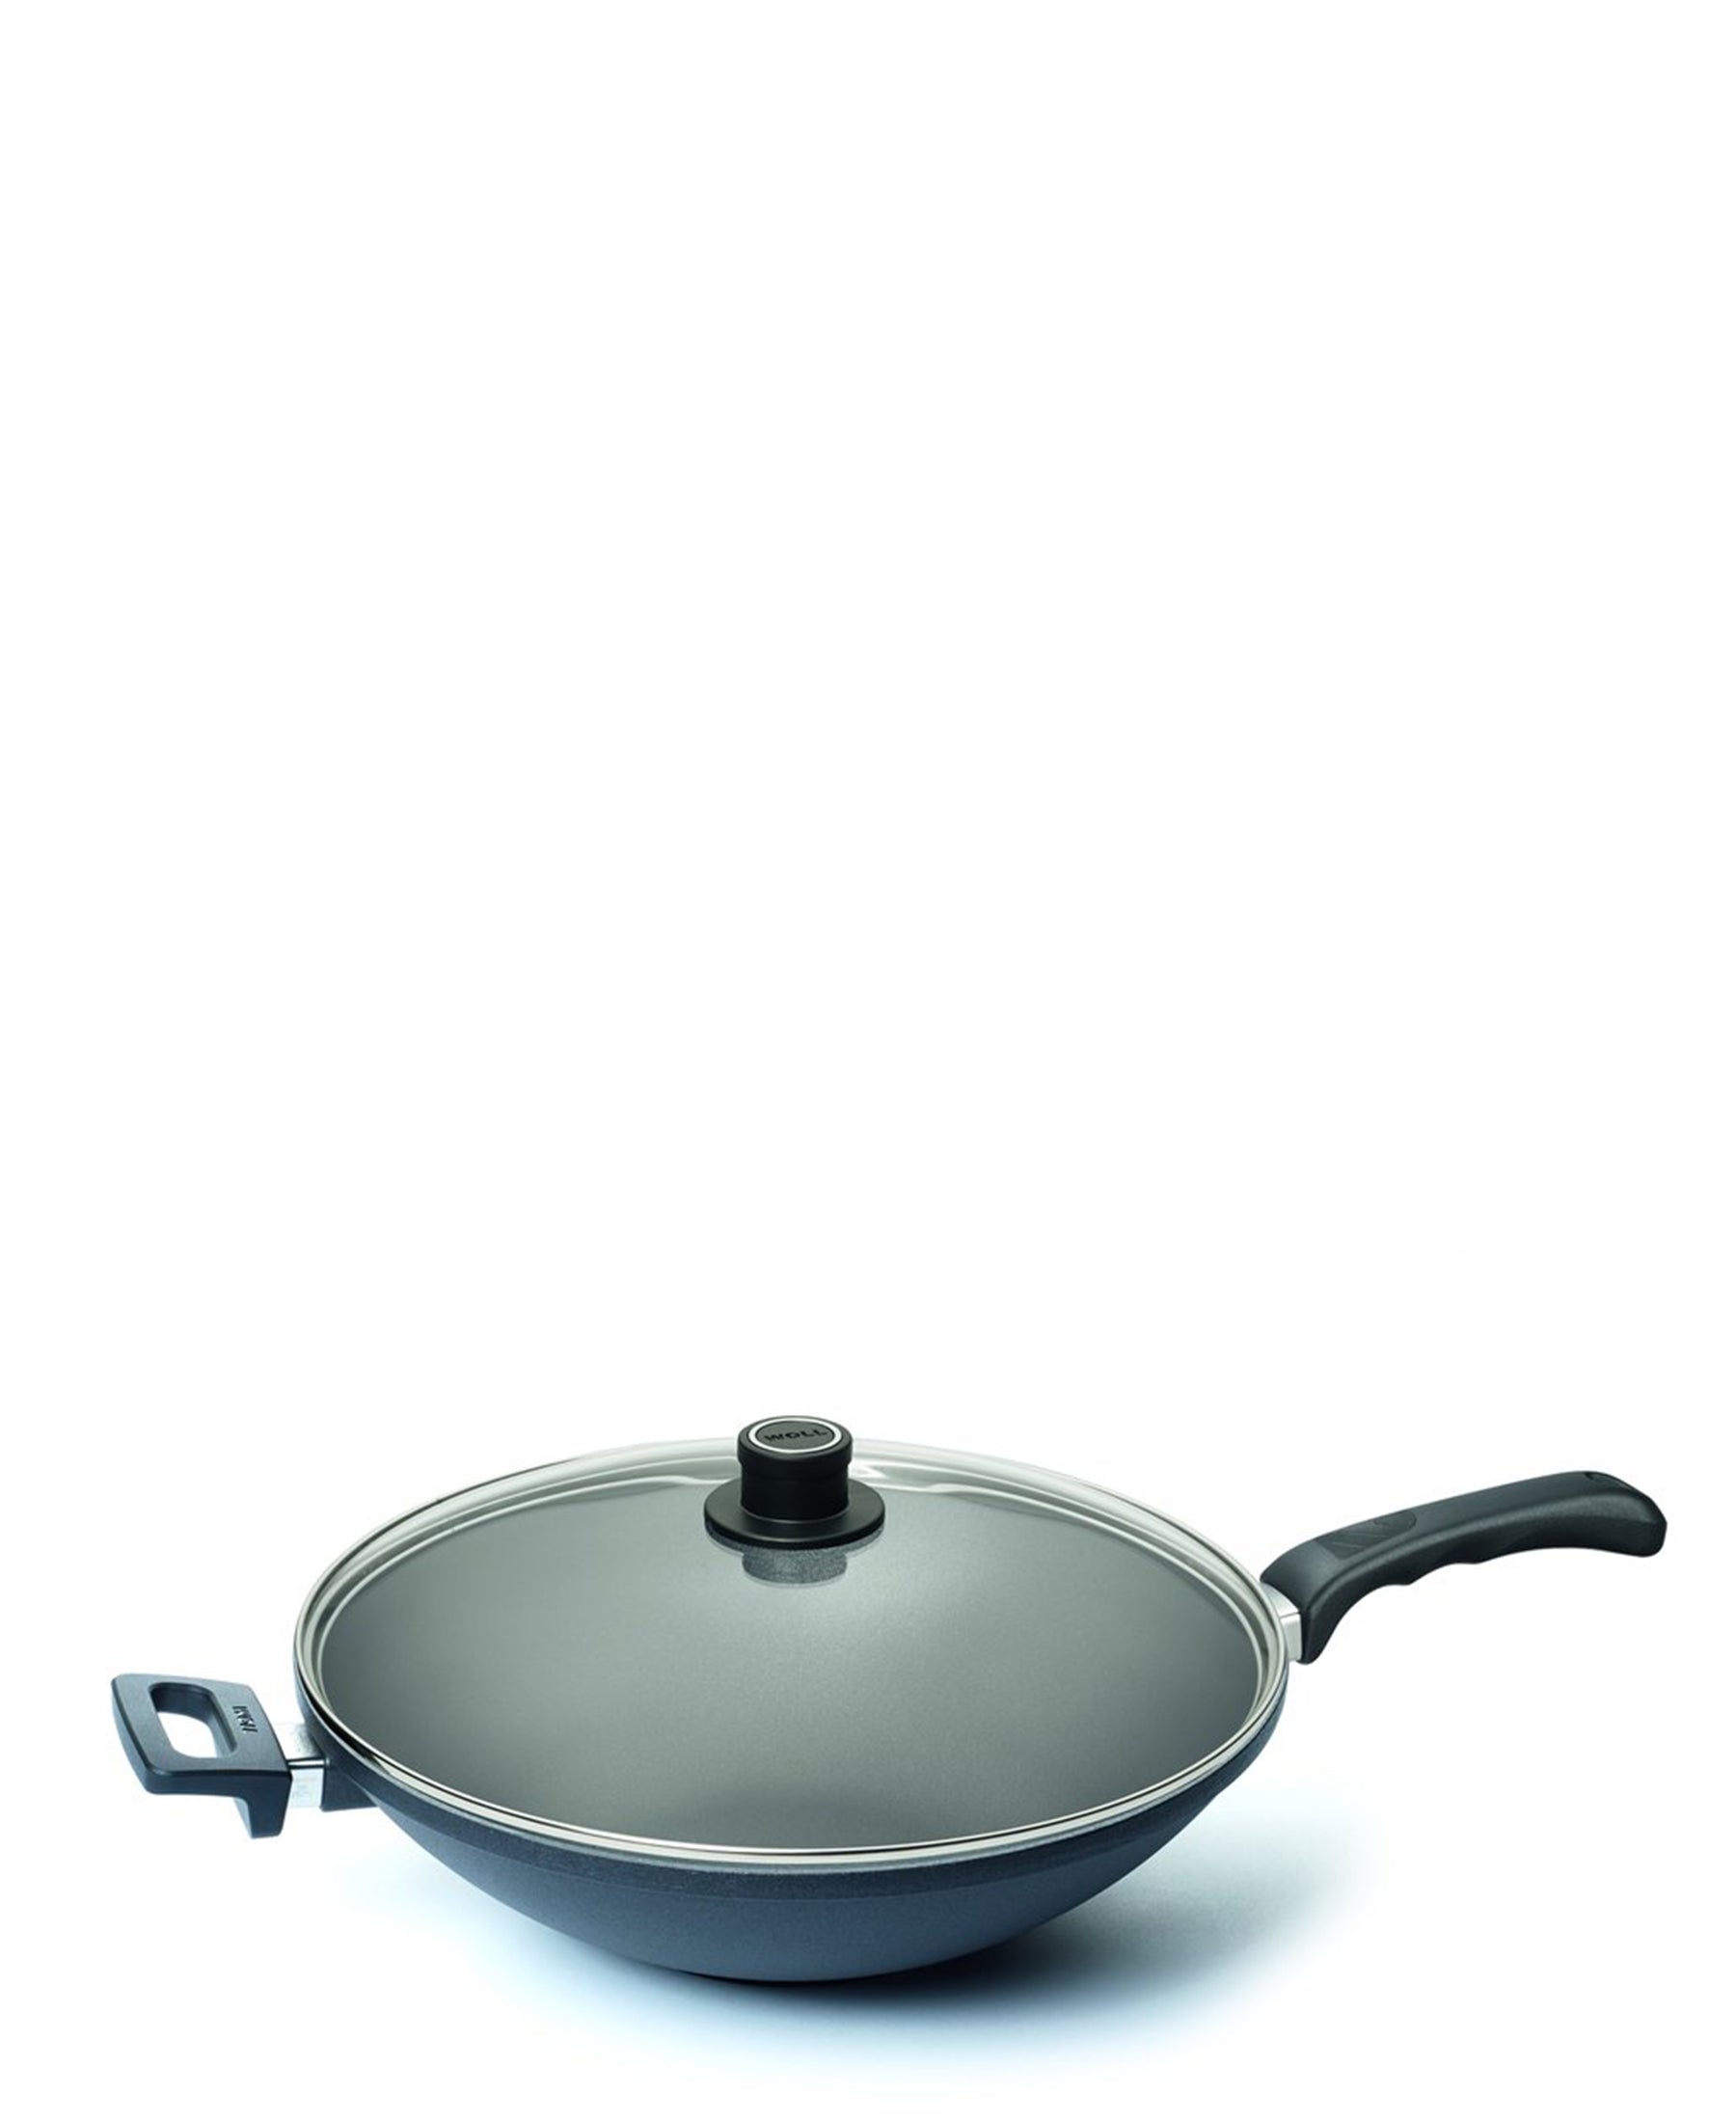 Woll Titanium Nowo 36cm Wok With Fixed Handle - Black